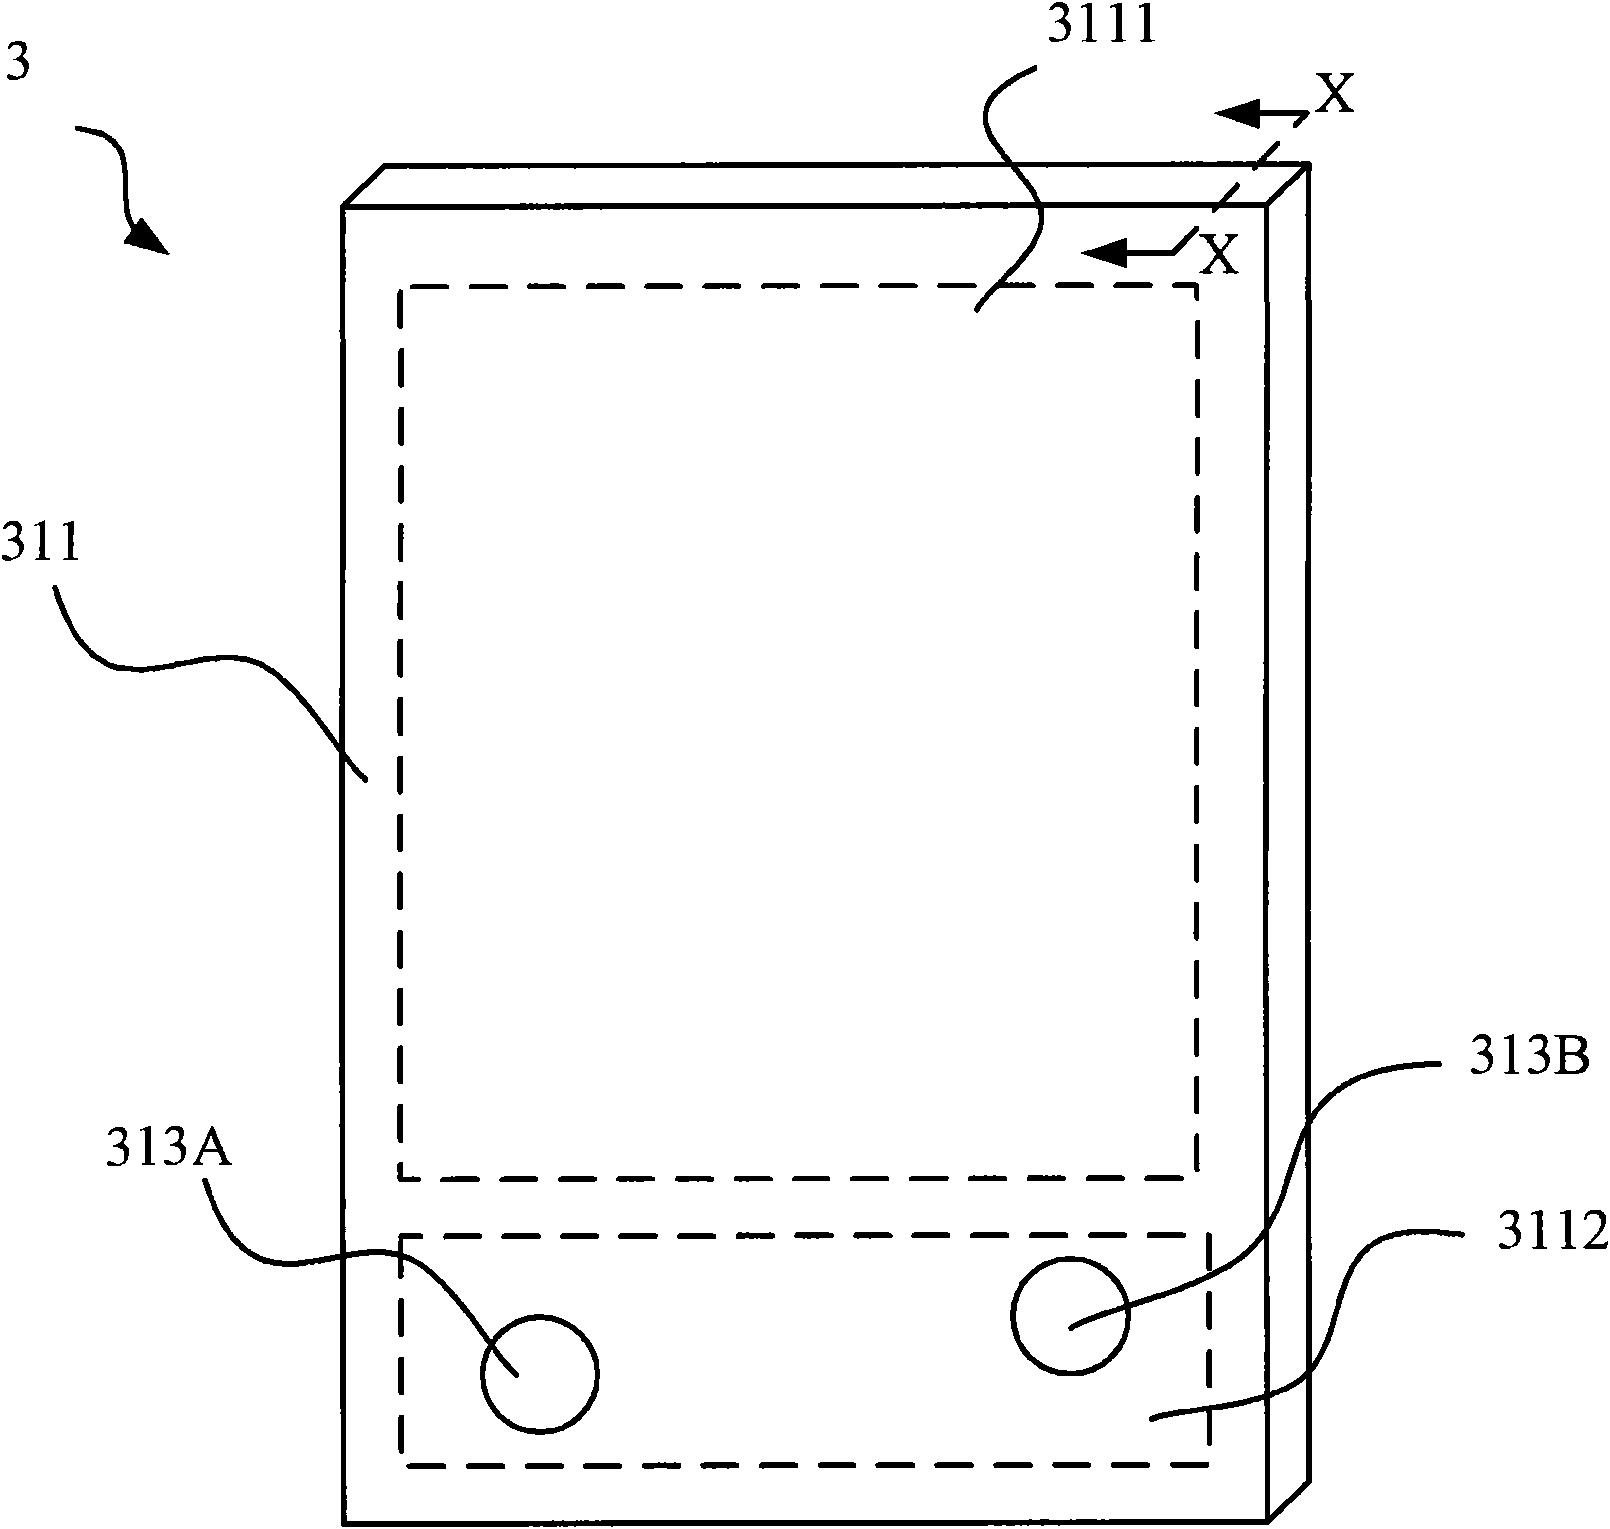 Electronic device with touch function